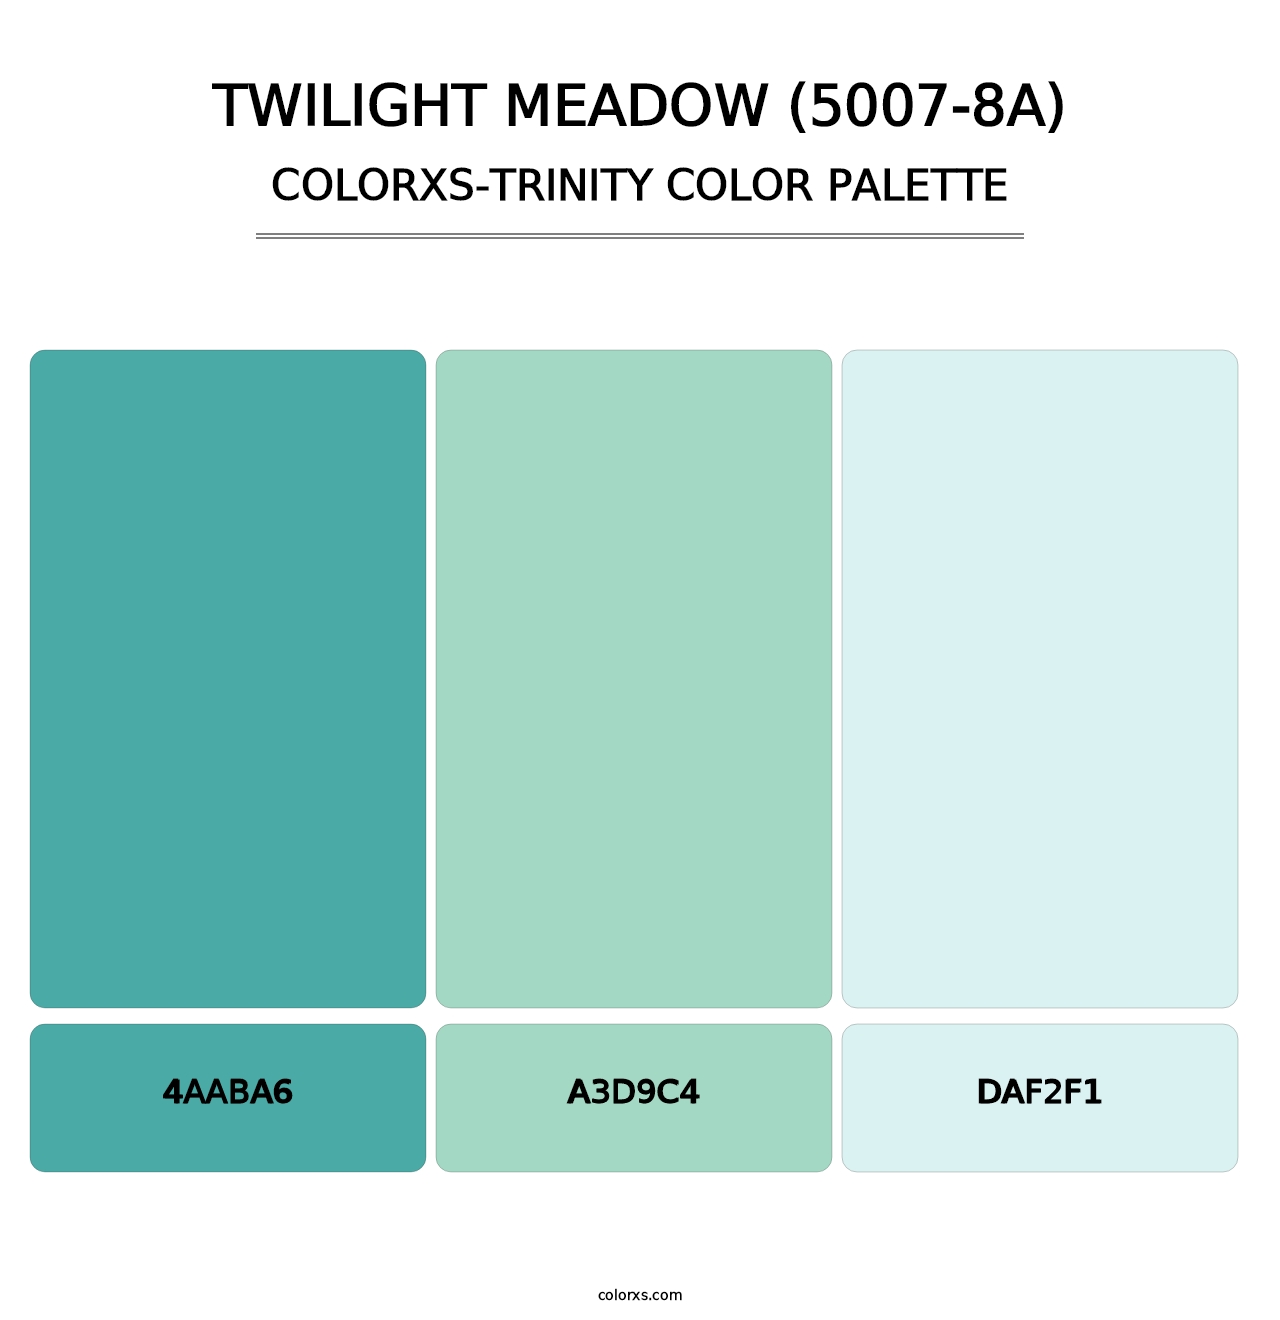 Twilight Meadow (5007-8A) - Colorxs Trinity Palette